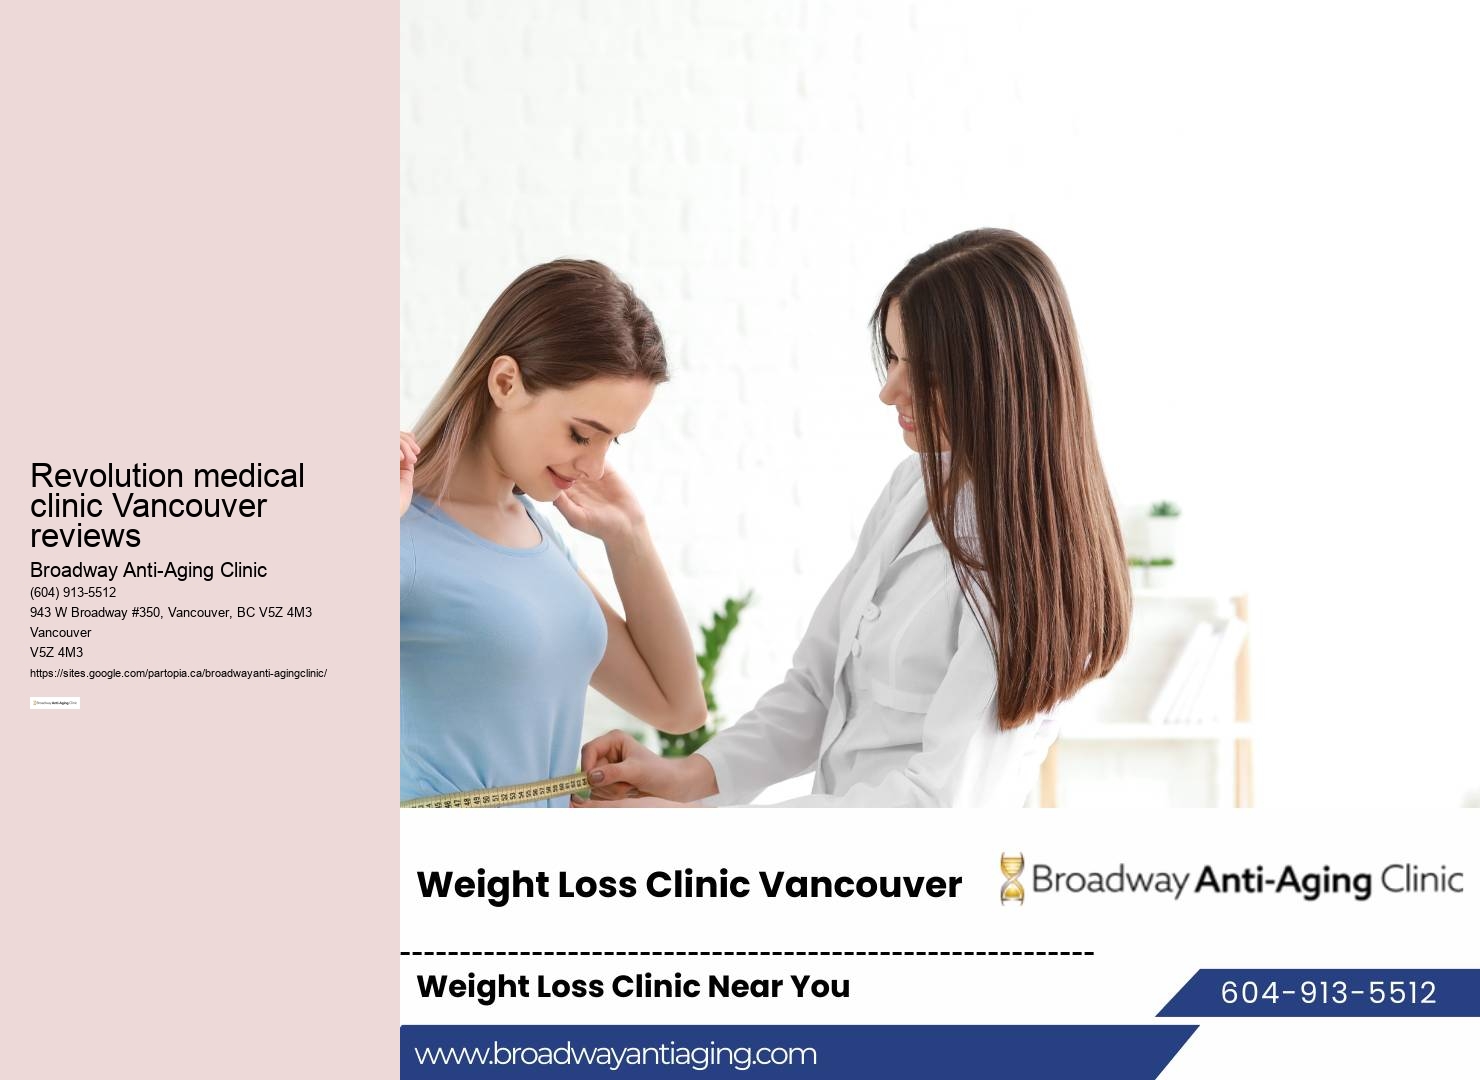 Revolution medical clinic Vancouver reviews